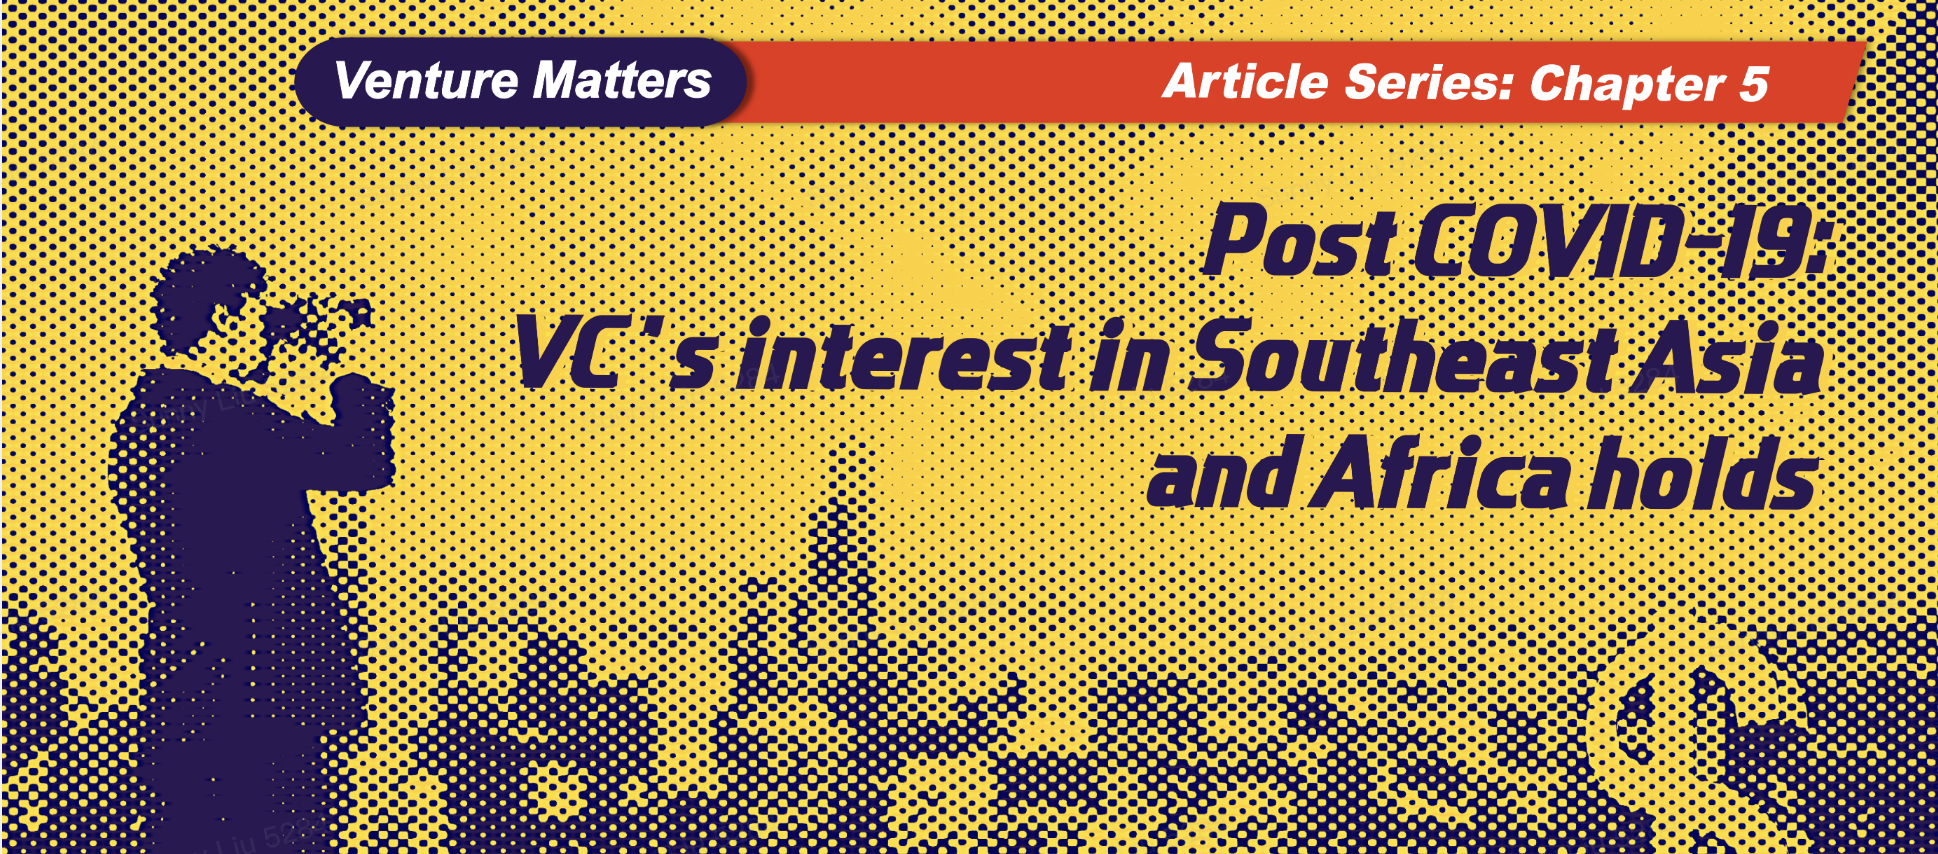 Venture Matters | VC’s interest in Southeast Asia and Africa holds, but startups must prove their worth